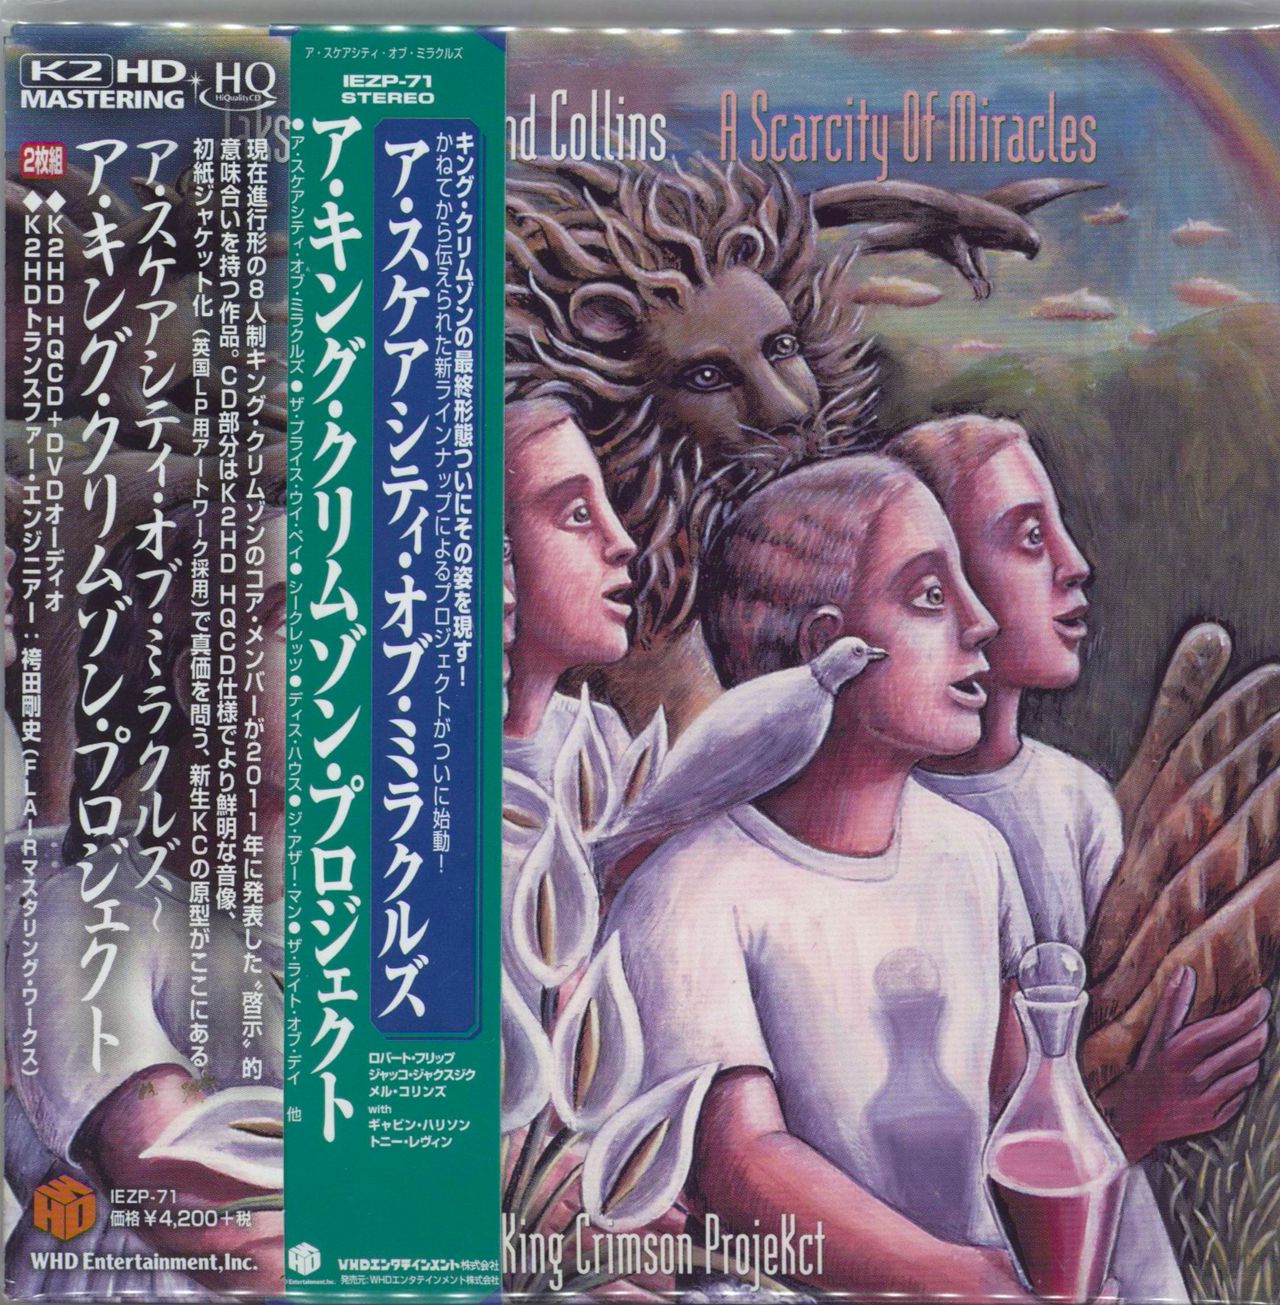 King Crimson A Scarcity Of Miracles Japanese 2-disc CD/DVD set IEZP-71